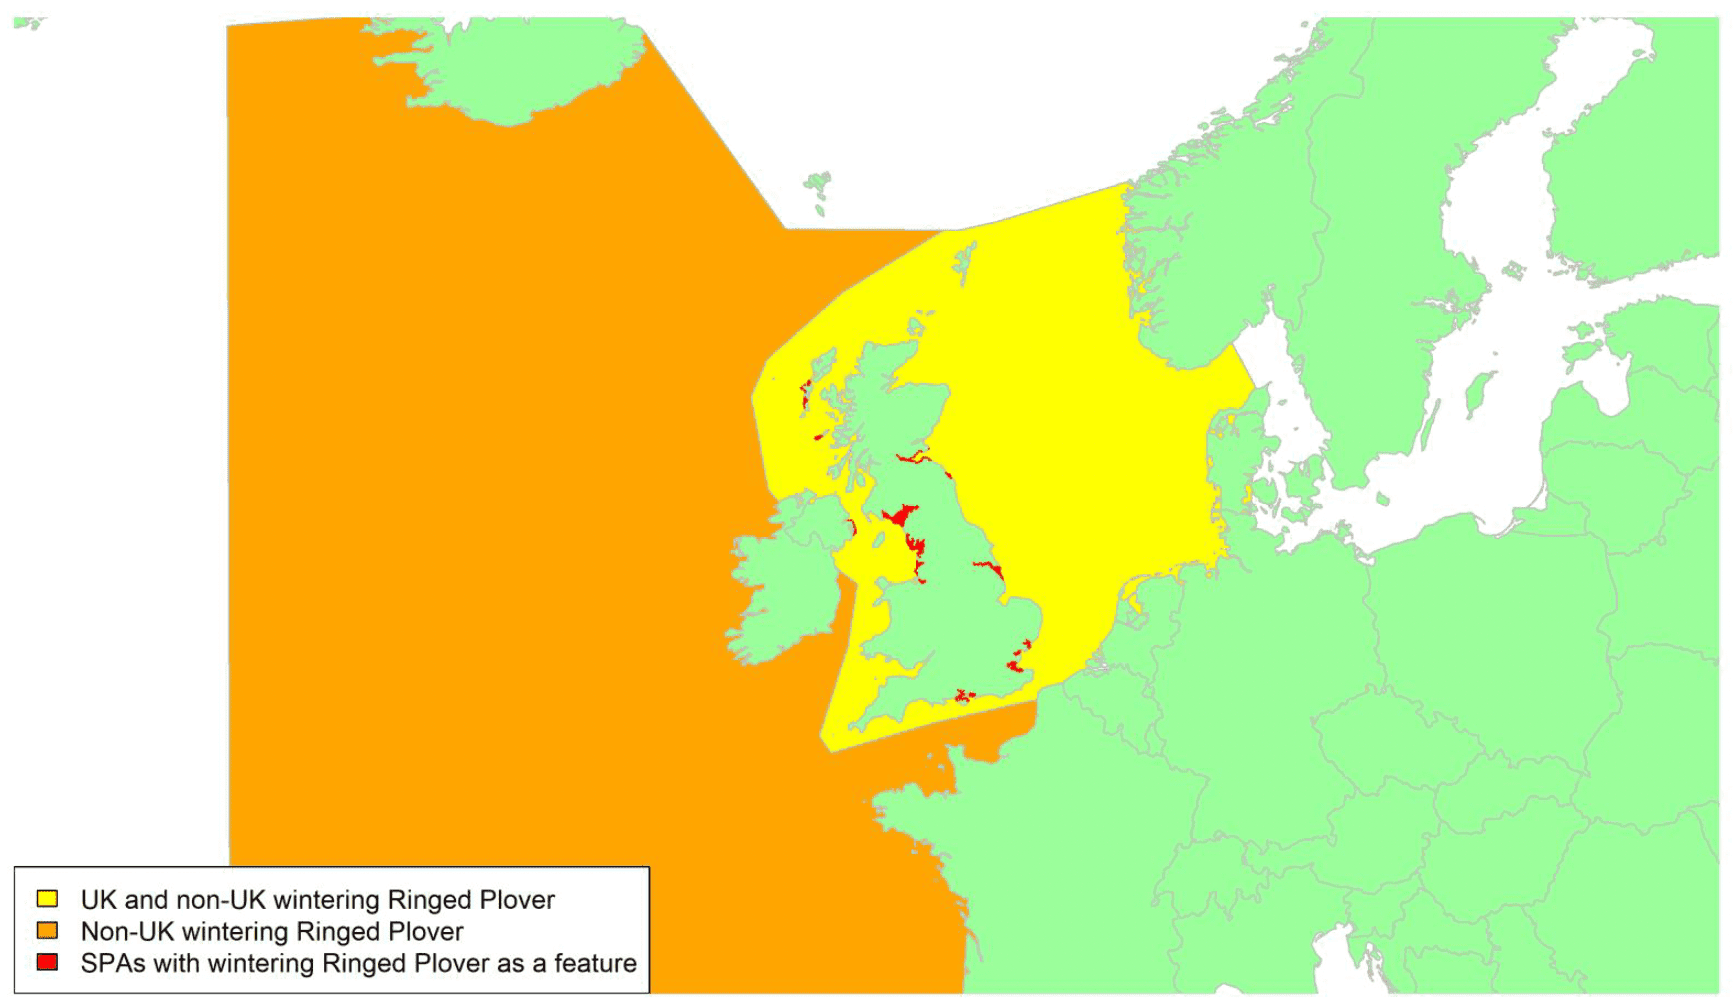 Map of North West Europe showing migratory routes and SPAs within the UK for wintering Ringed Plover as described in the text below.